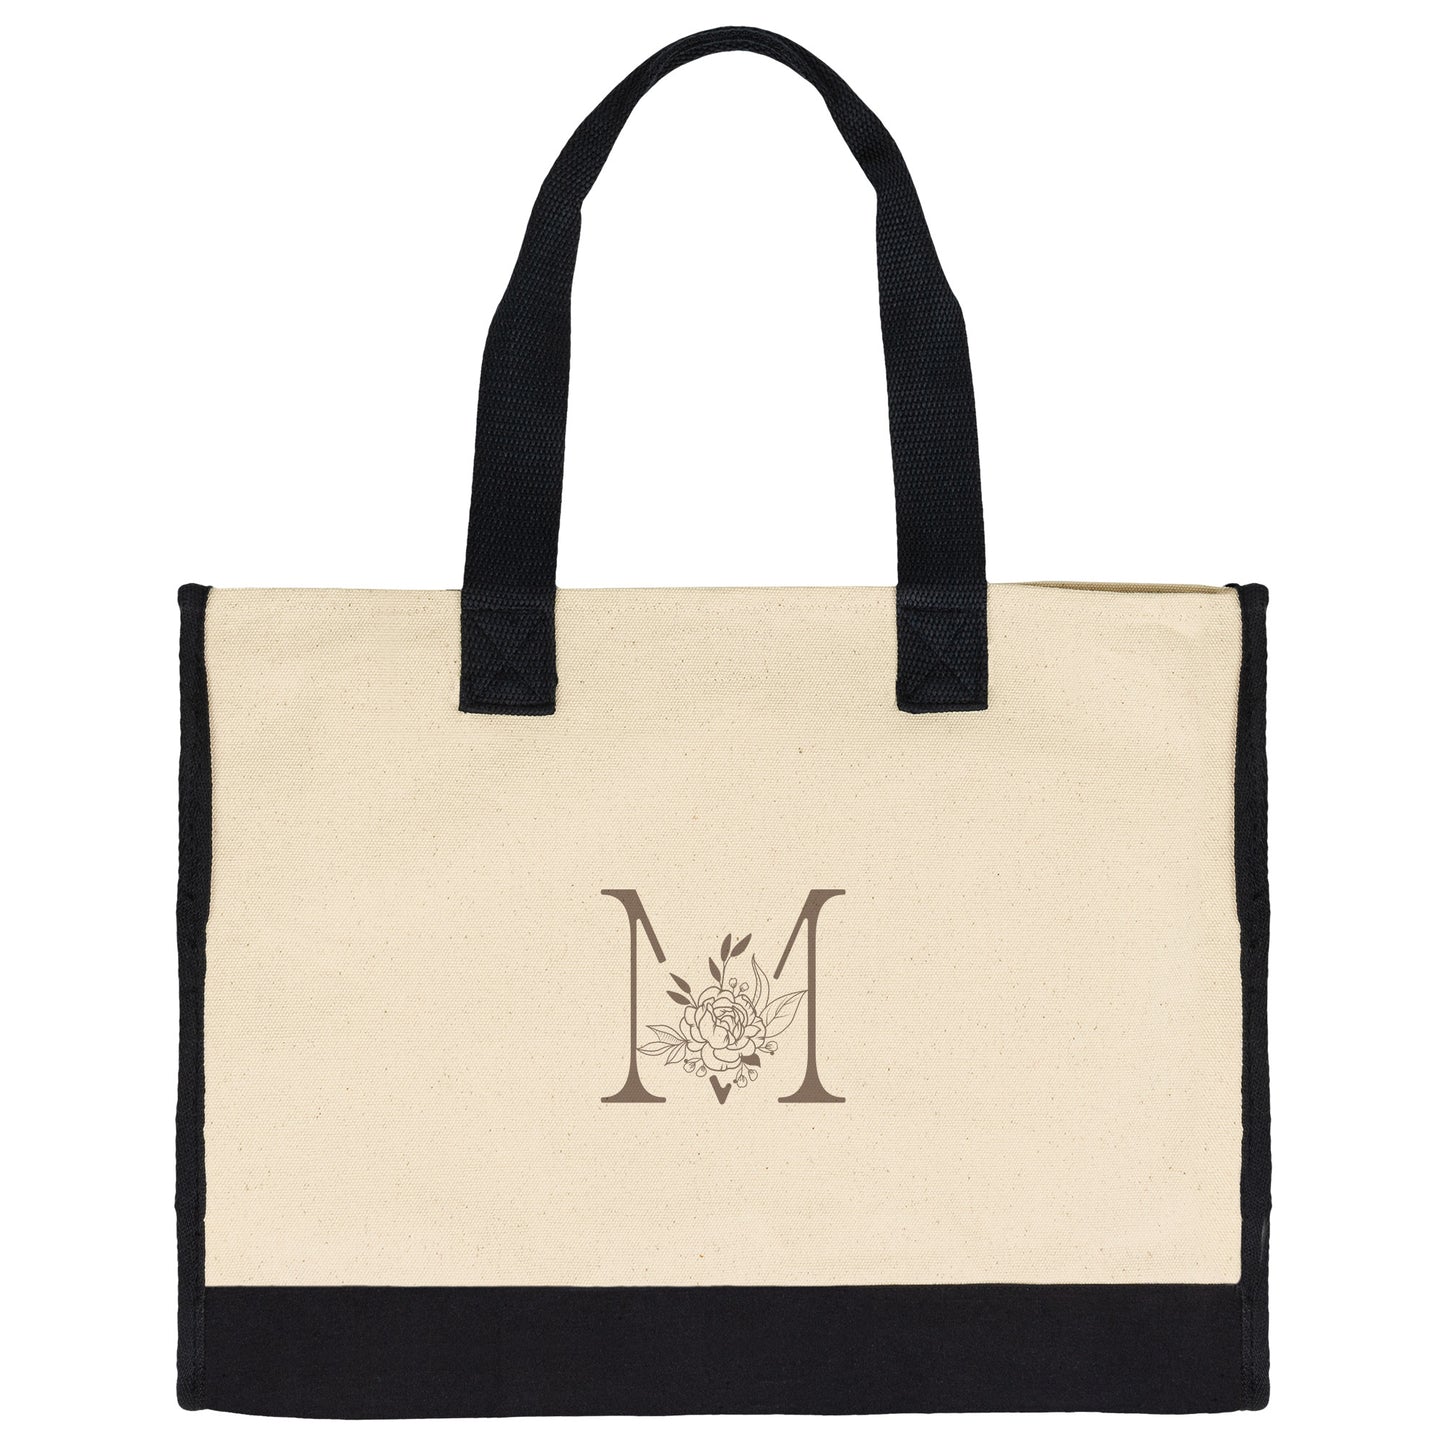 Premium Personalized Tote Bag with Initial, Large Tote Bag For Women